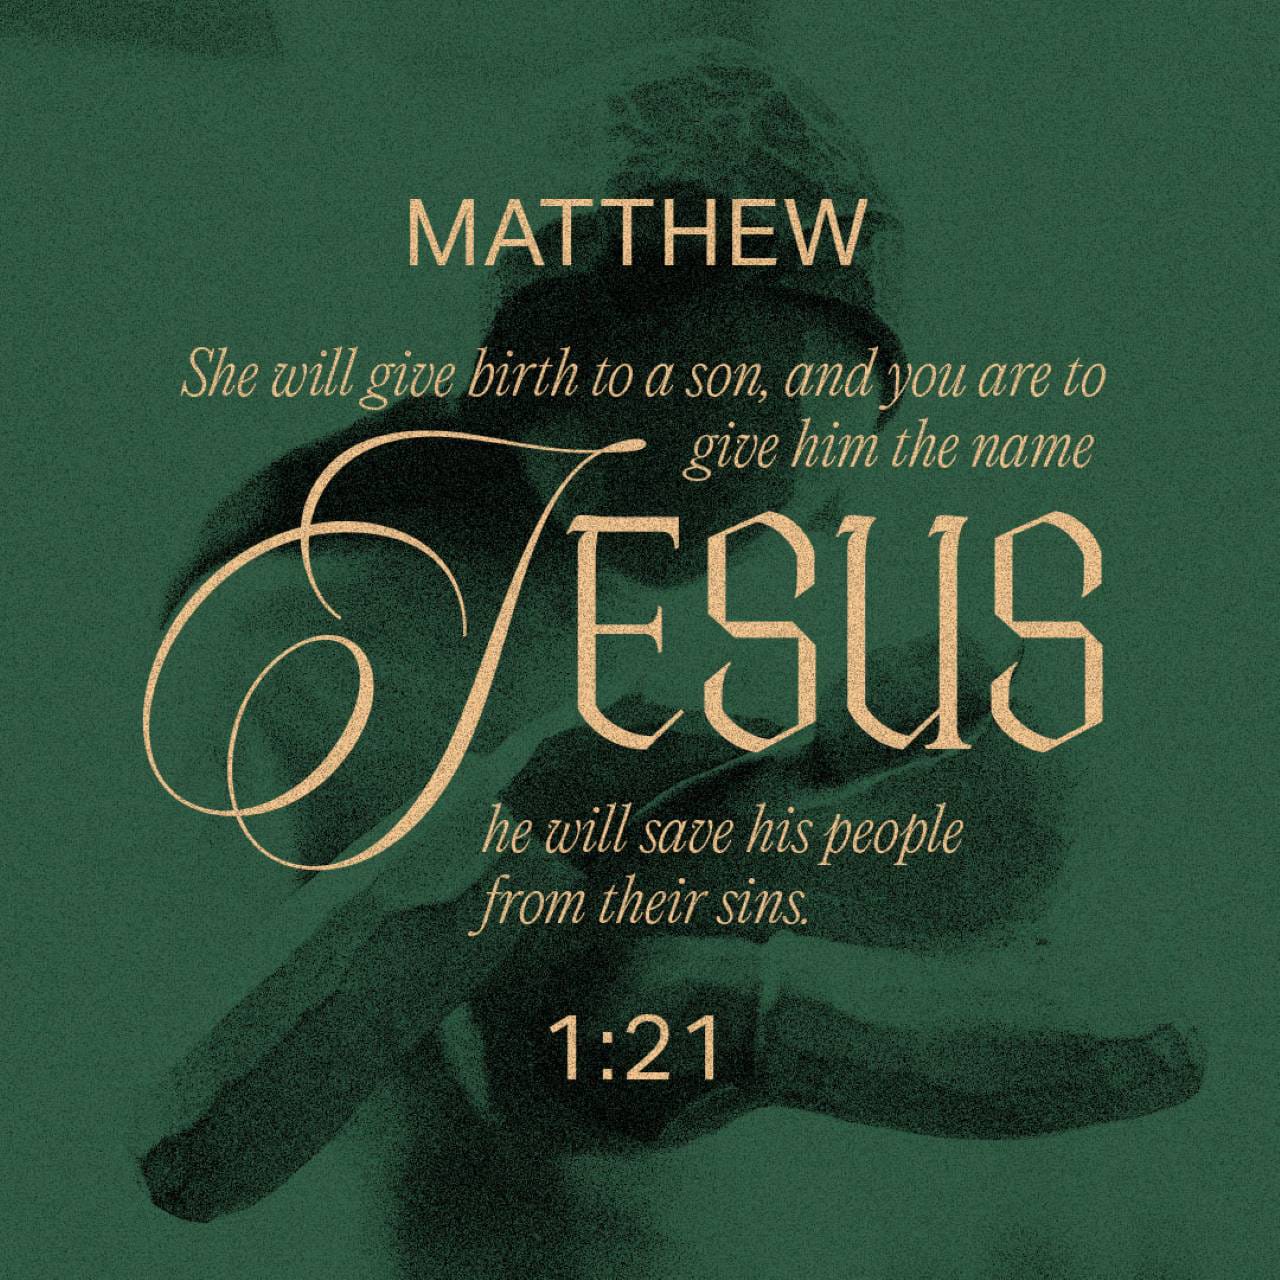 Matthew 1:21 While he was trying to figure a way out, he had a ...